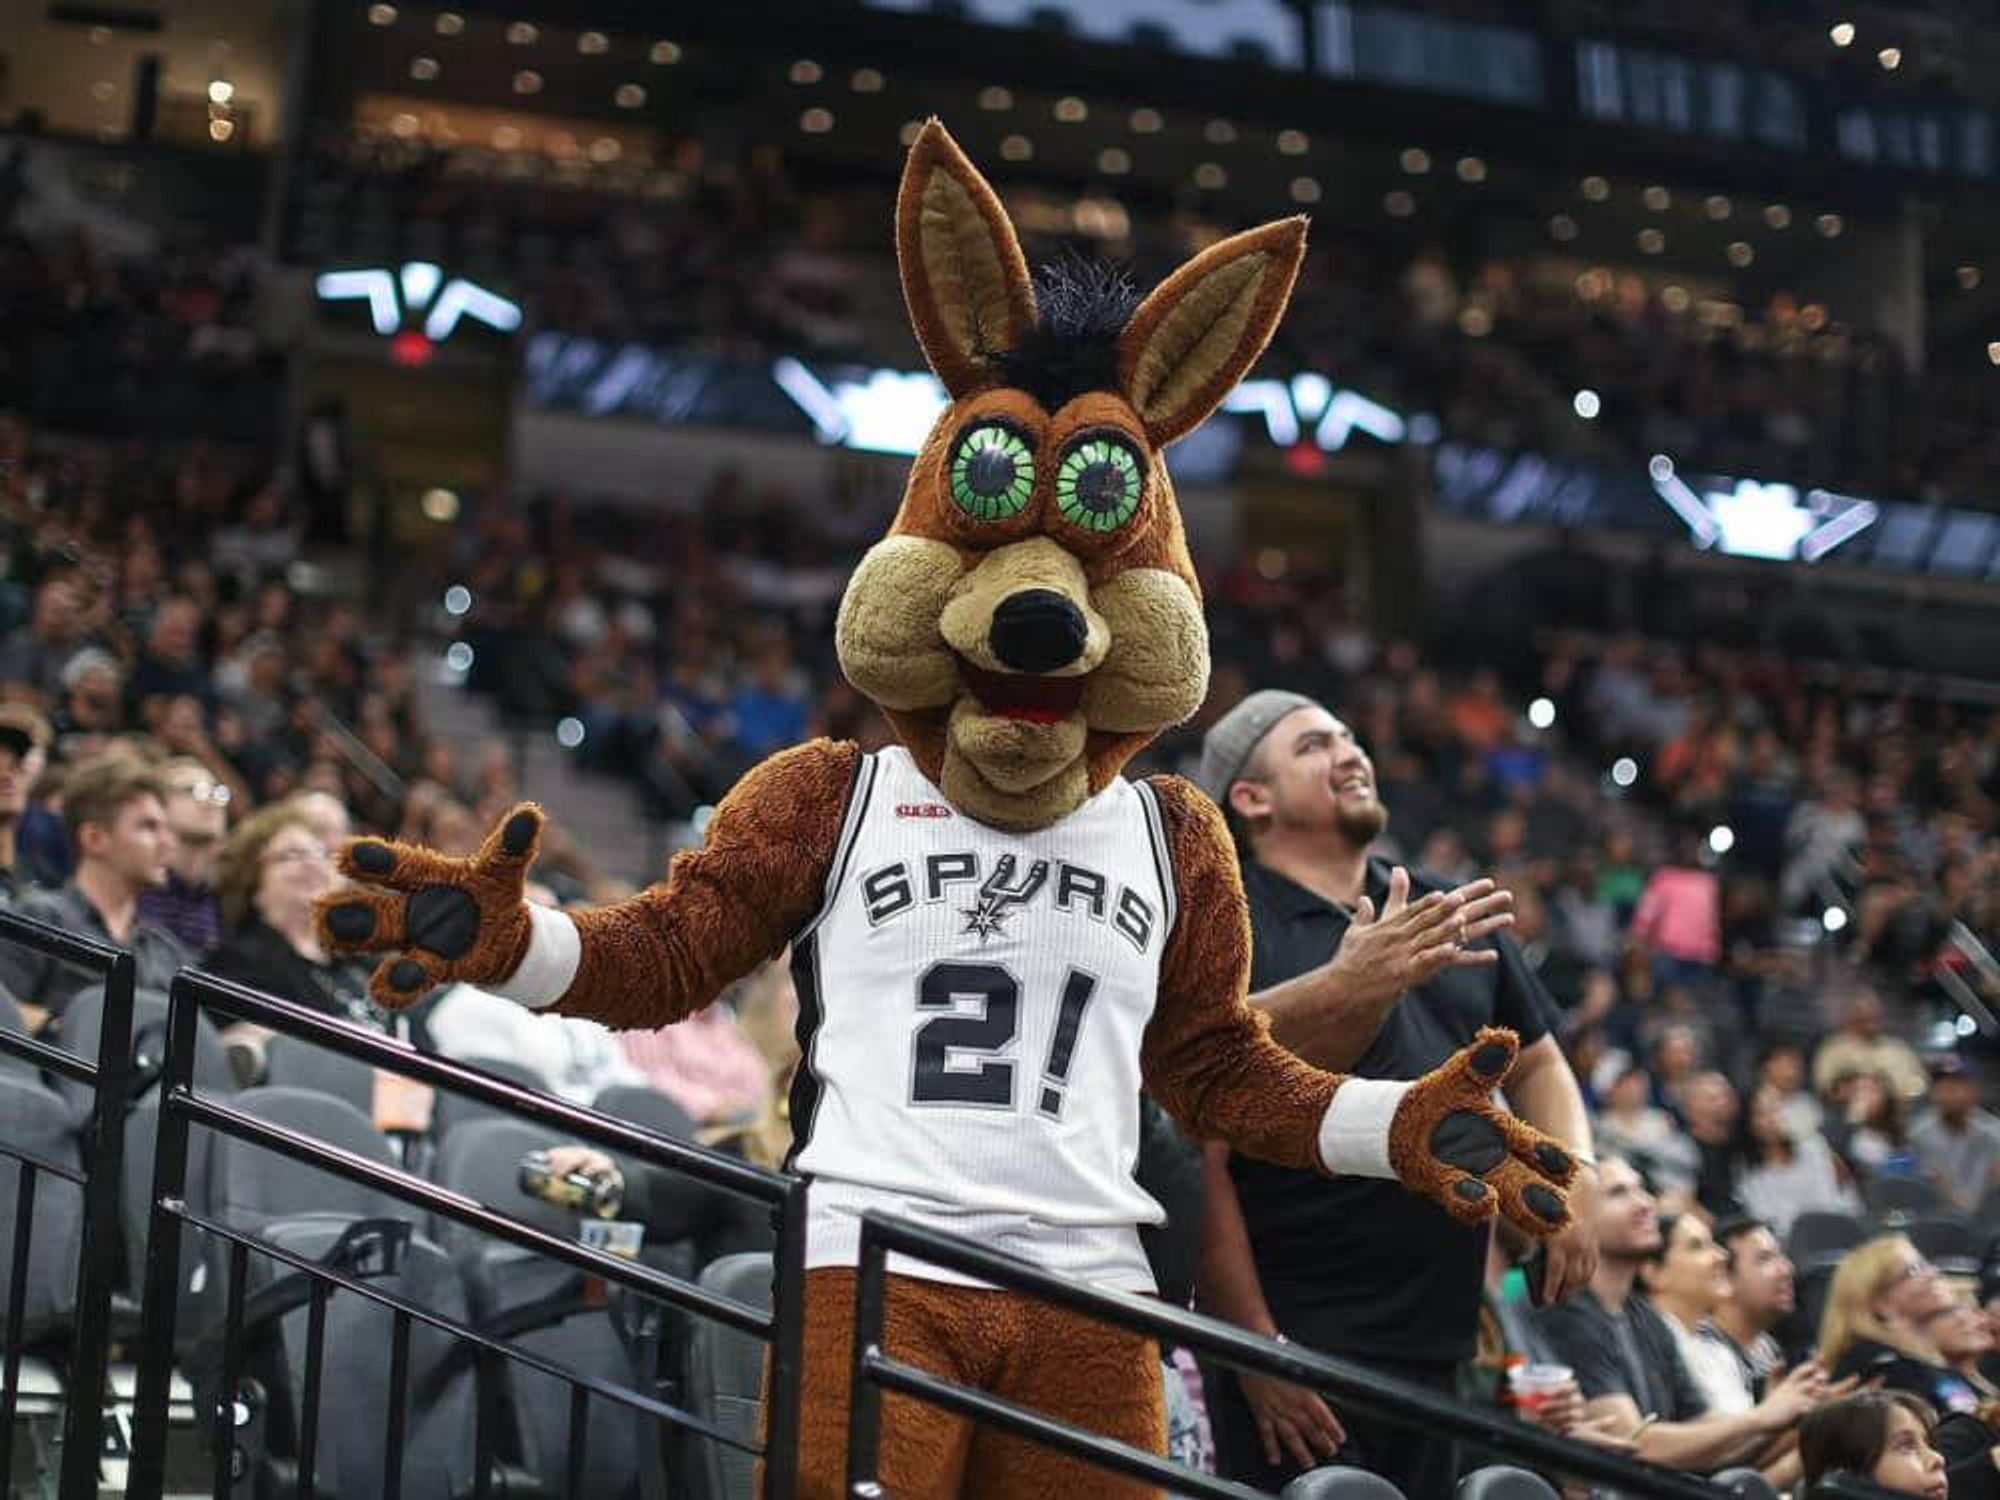 San Antonio Spurs play in Austin Thursday and Saturday, opens 500 standing  room tickets